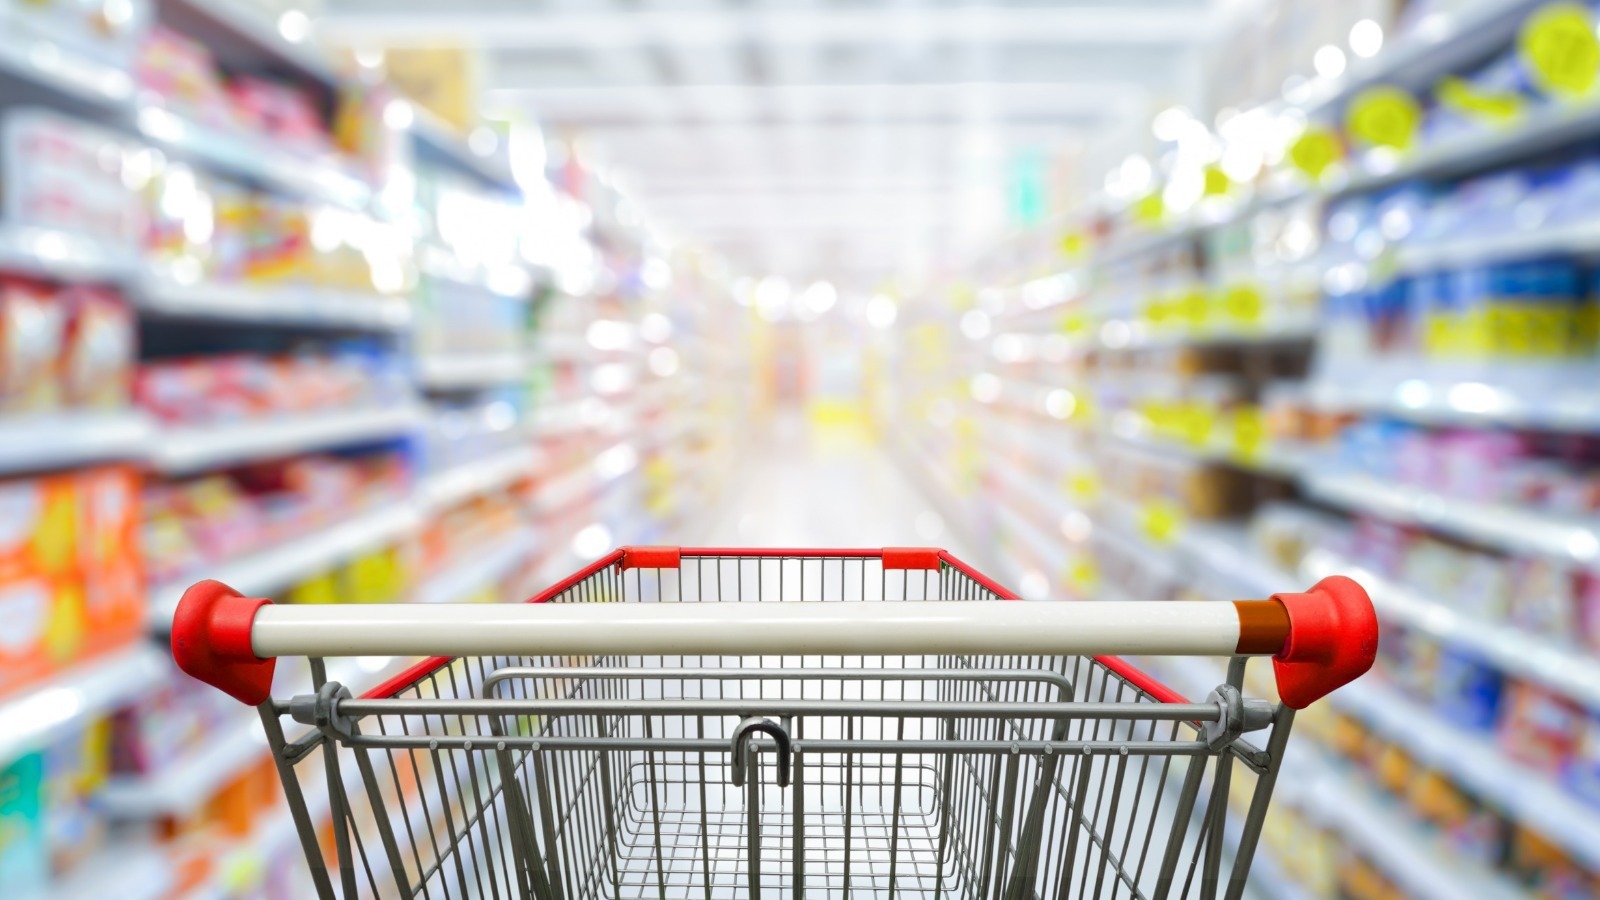 The Most Profitable Items For Grocery Stores Might Surprise You